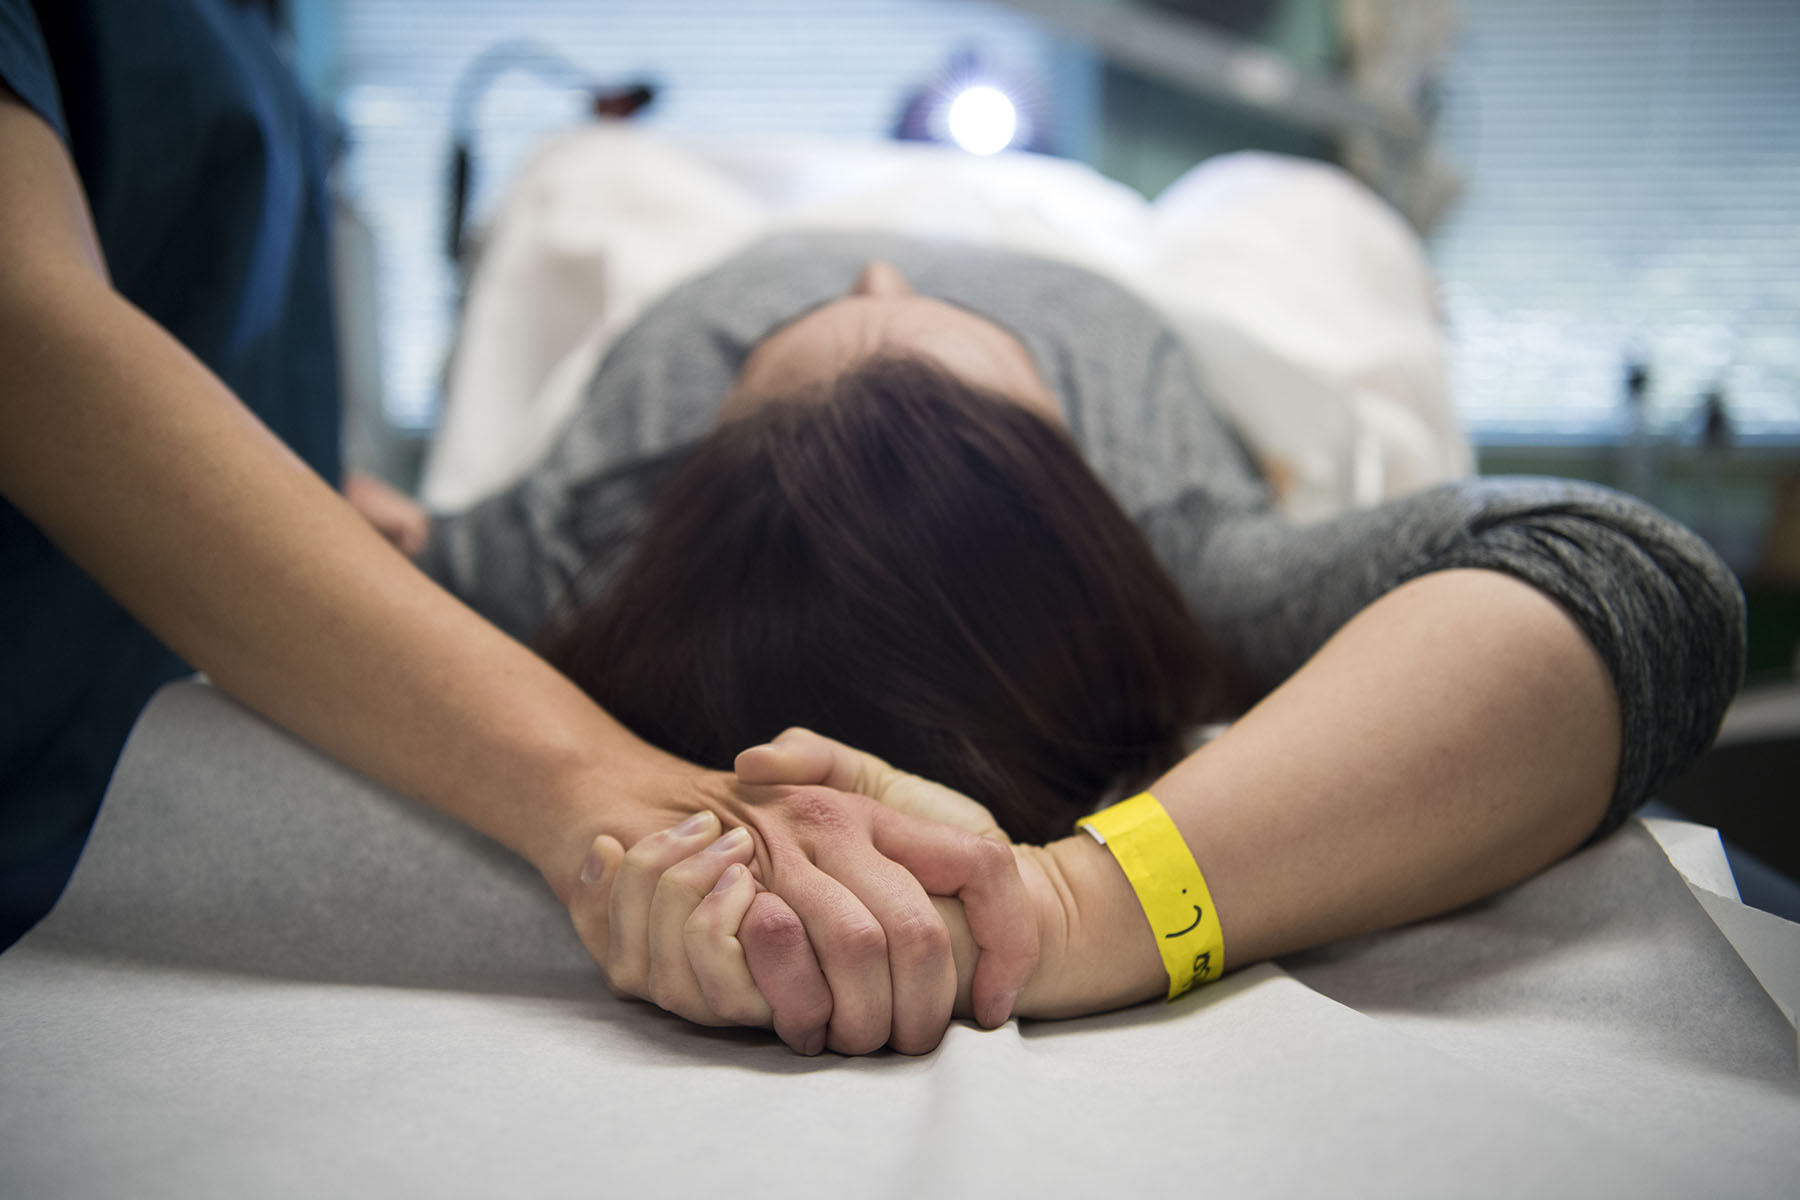 An abortion doula holds hands with a patient during a procedure at an abortion clinic.